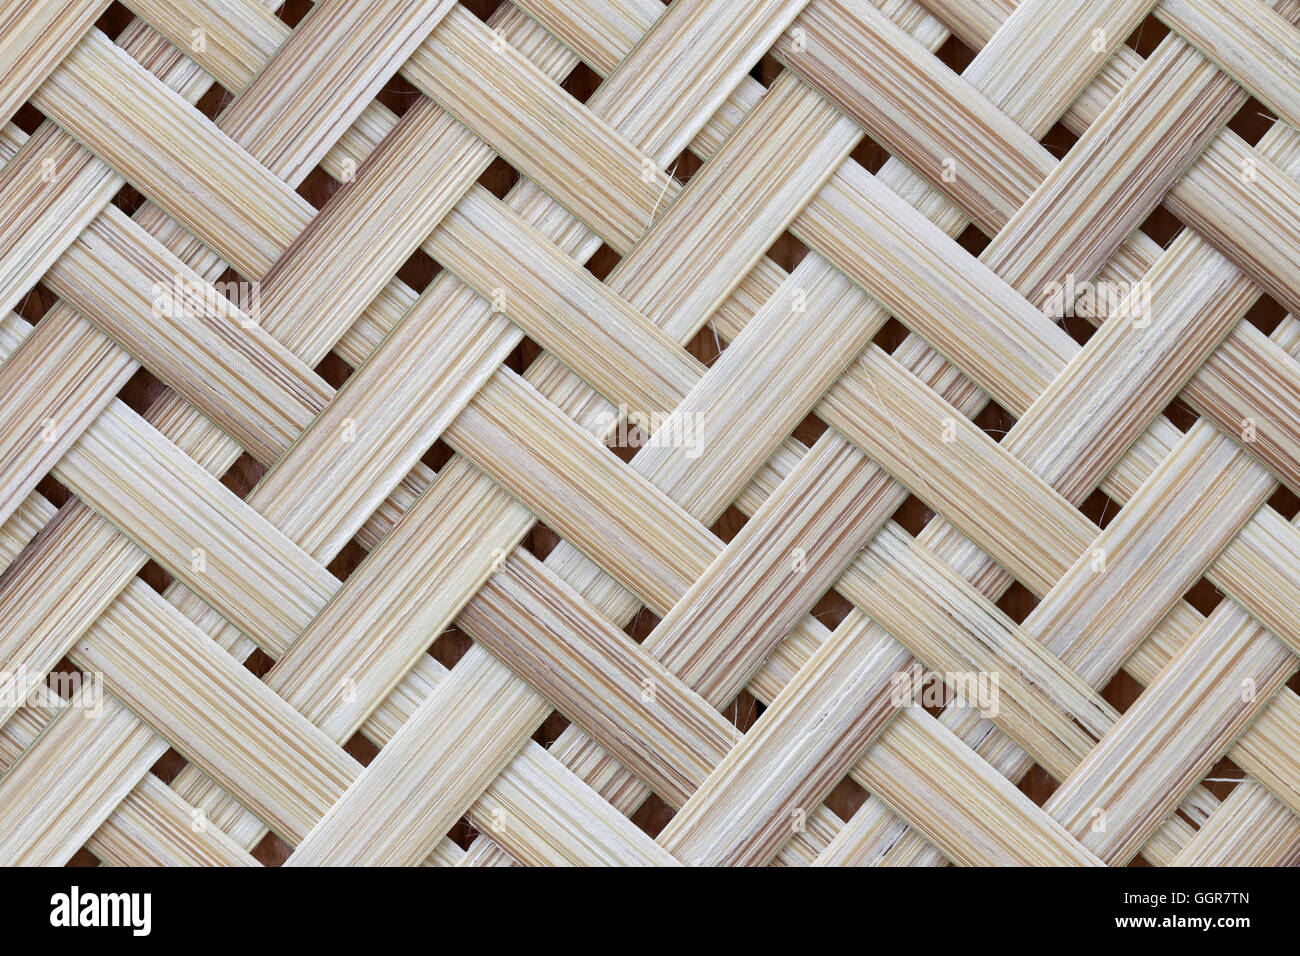 wooden surface of pattern wicker bamboo in handmade for texture design nature background. Stock Photo